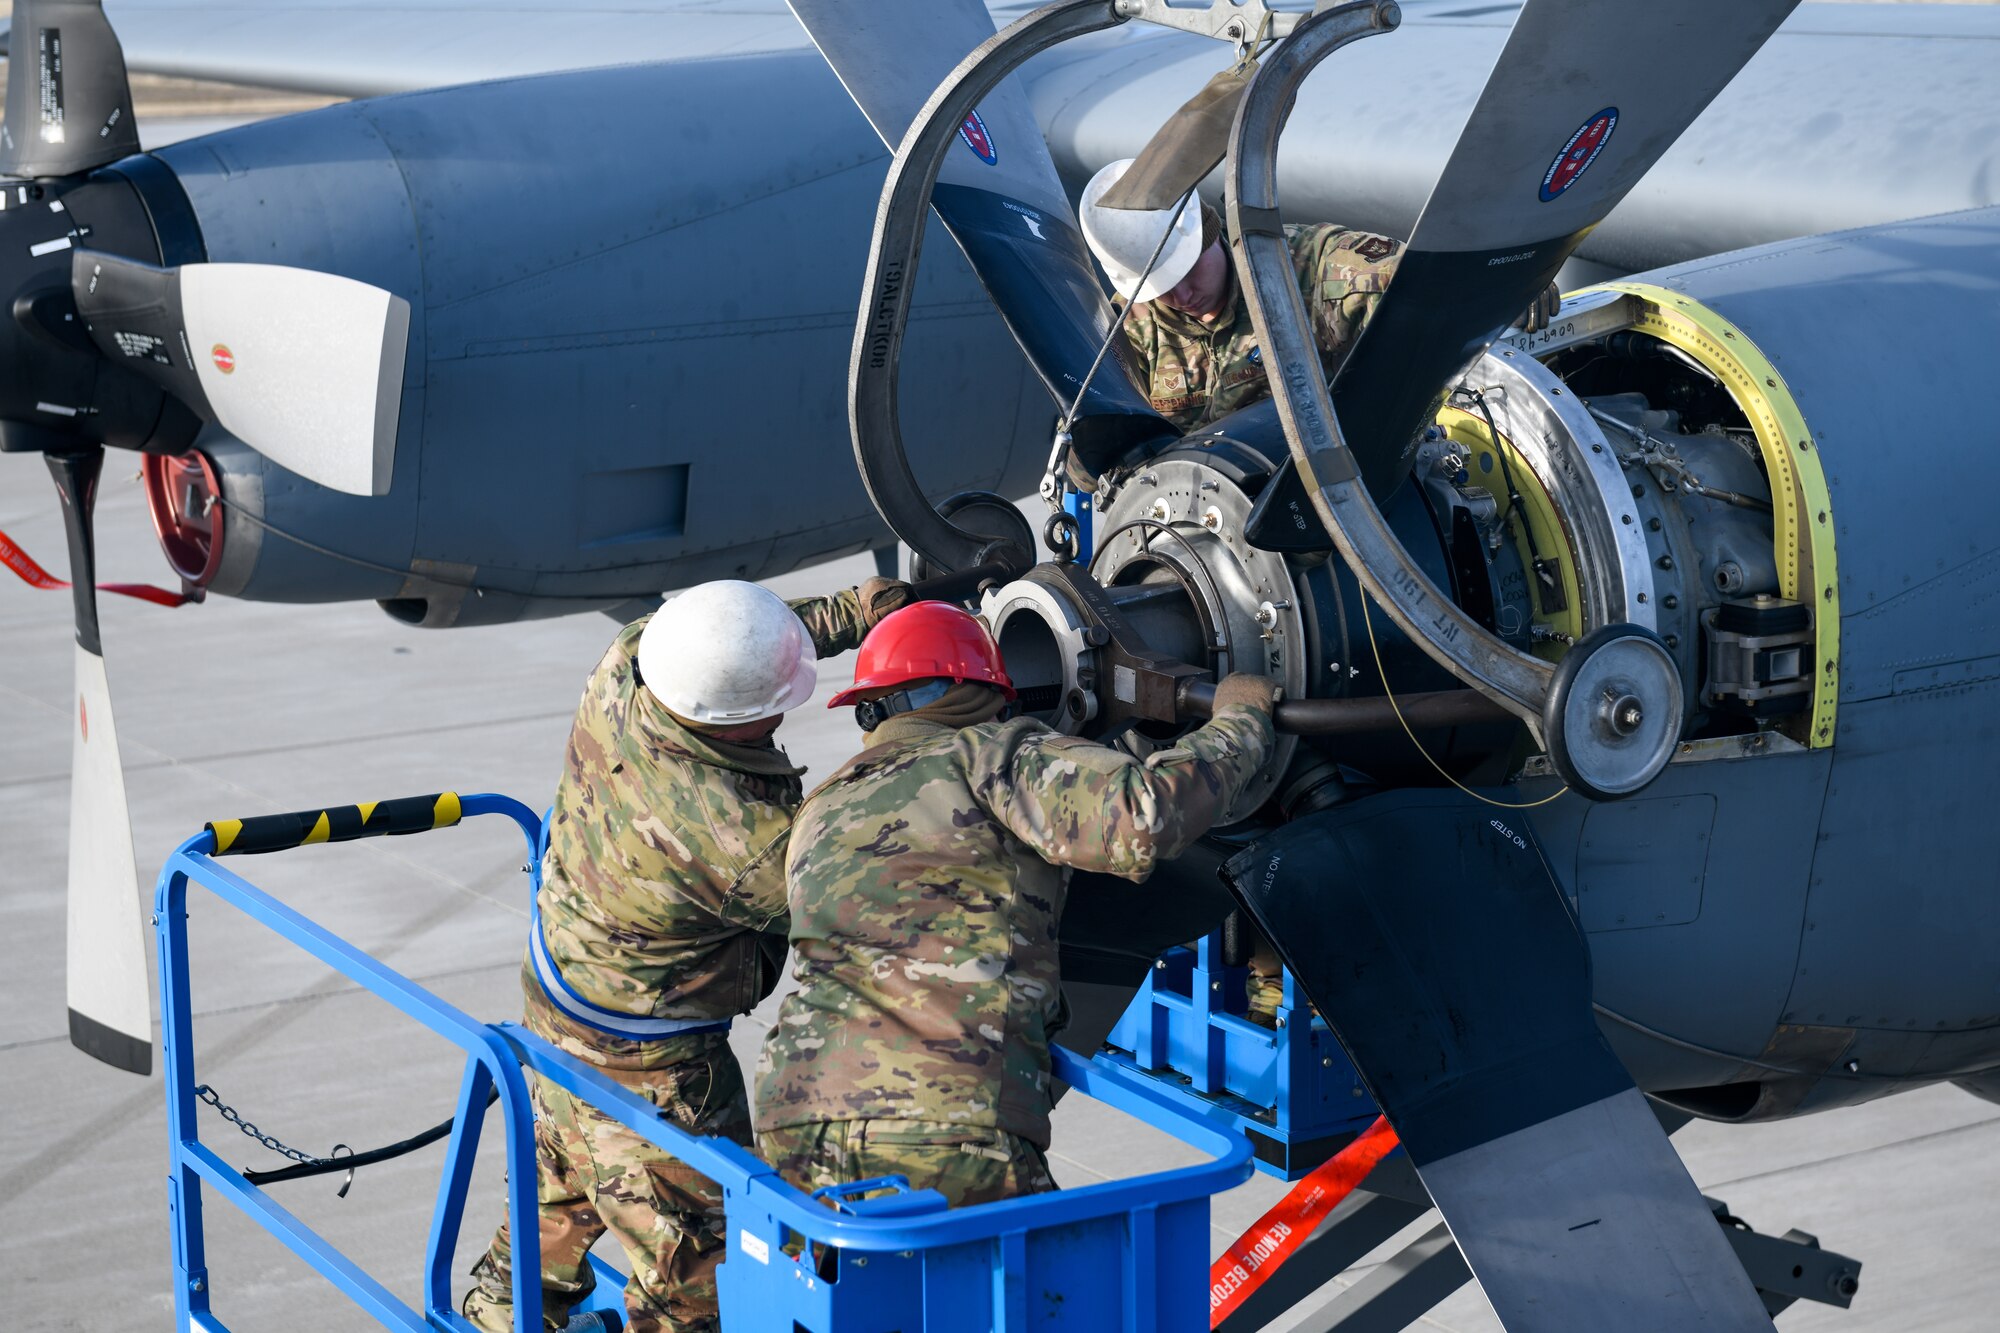 Aerospace propulsion technicians assigned to the 910th Aircraft Maintenance Squadron install a propeller onto a 910th Airlift Wing C-130H Hercules aircraft, Jan. 17, 2023, at Mountain Home Air Force Base, Idaho.